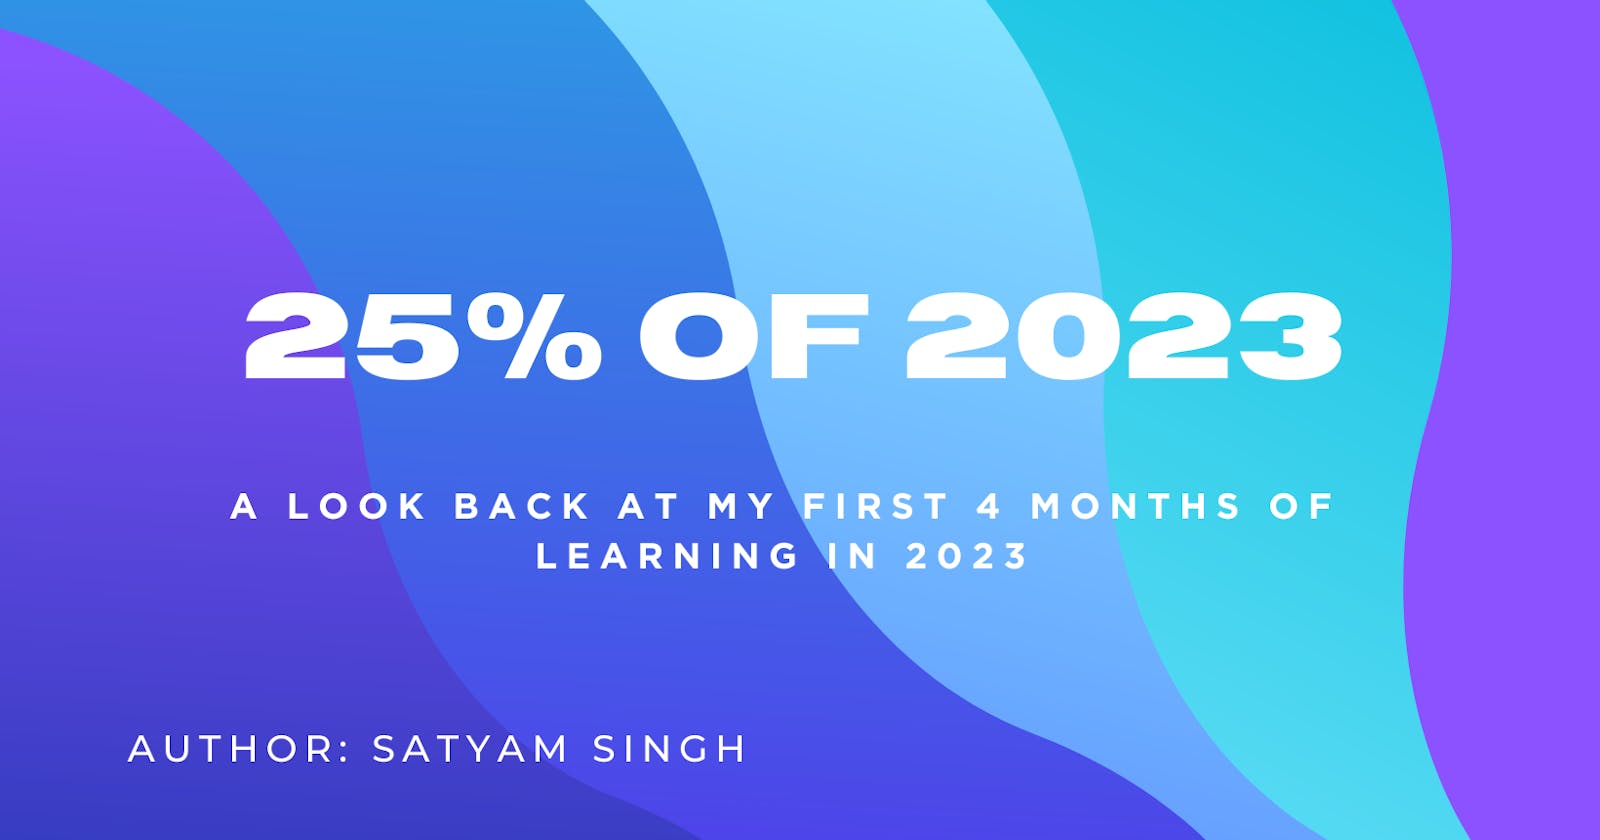 25% of 2023: A Look Back at My First 4 Months of Learning in 2023